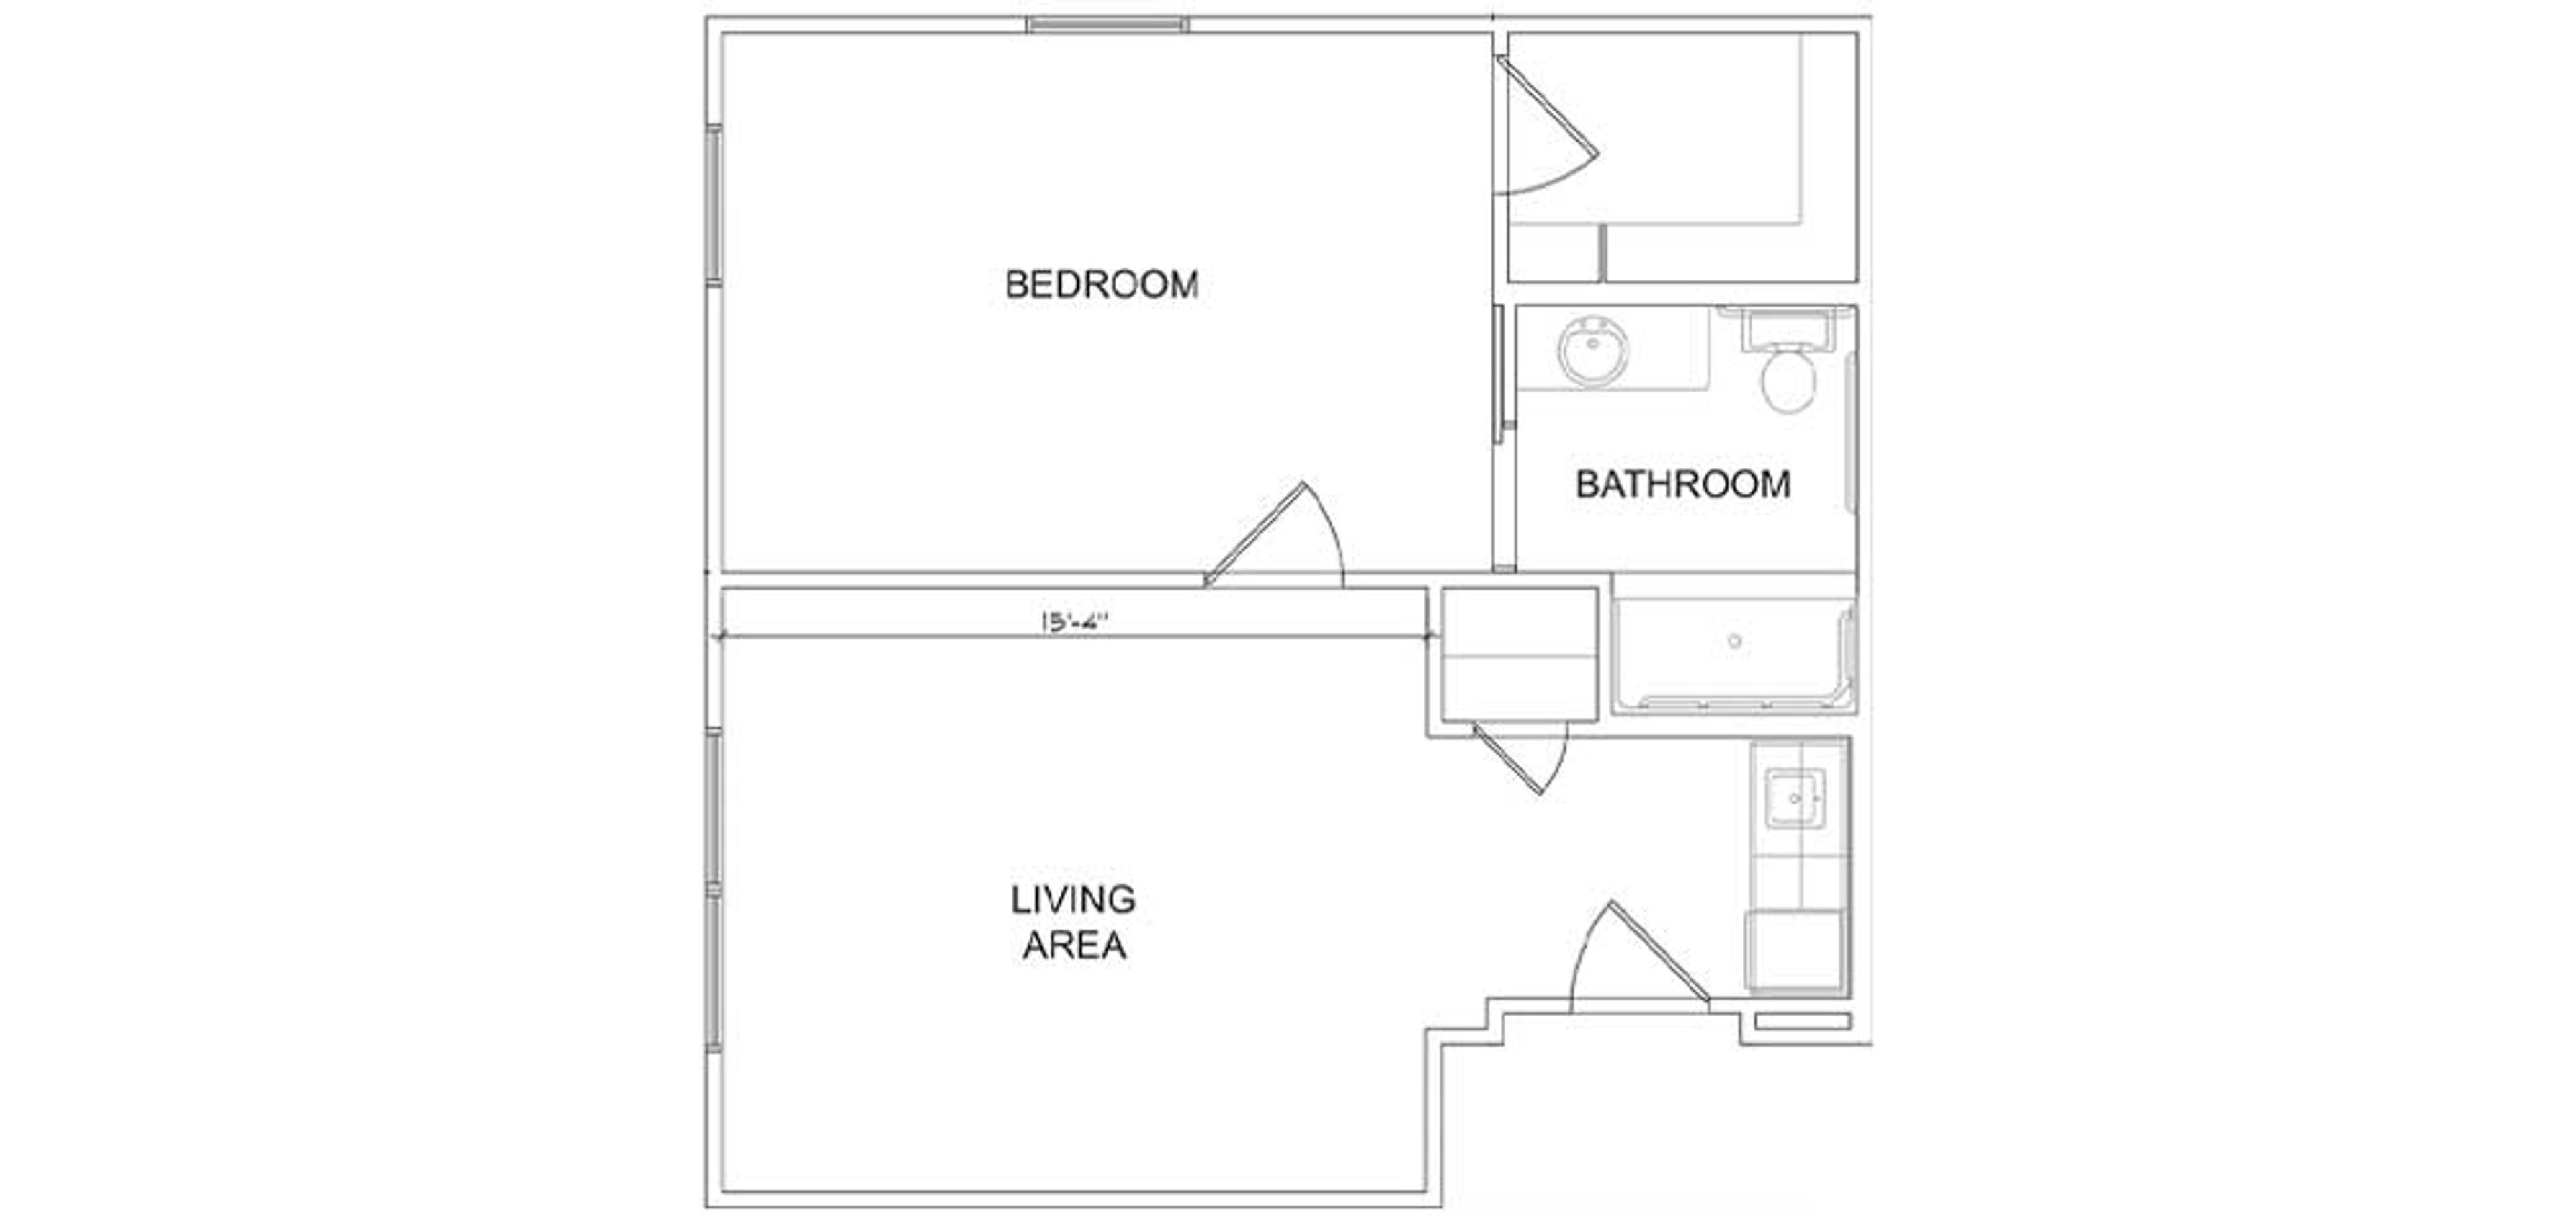 Floorplan - Stonefield - 1 bed, 1 bath, Luxury Assisted Living